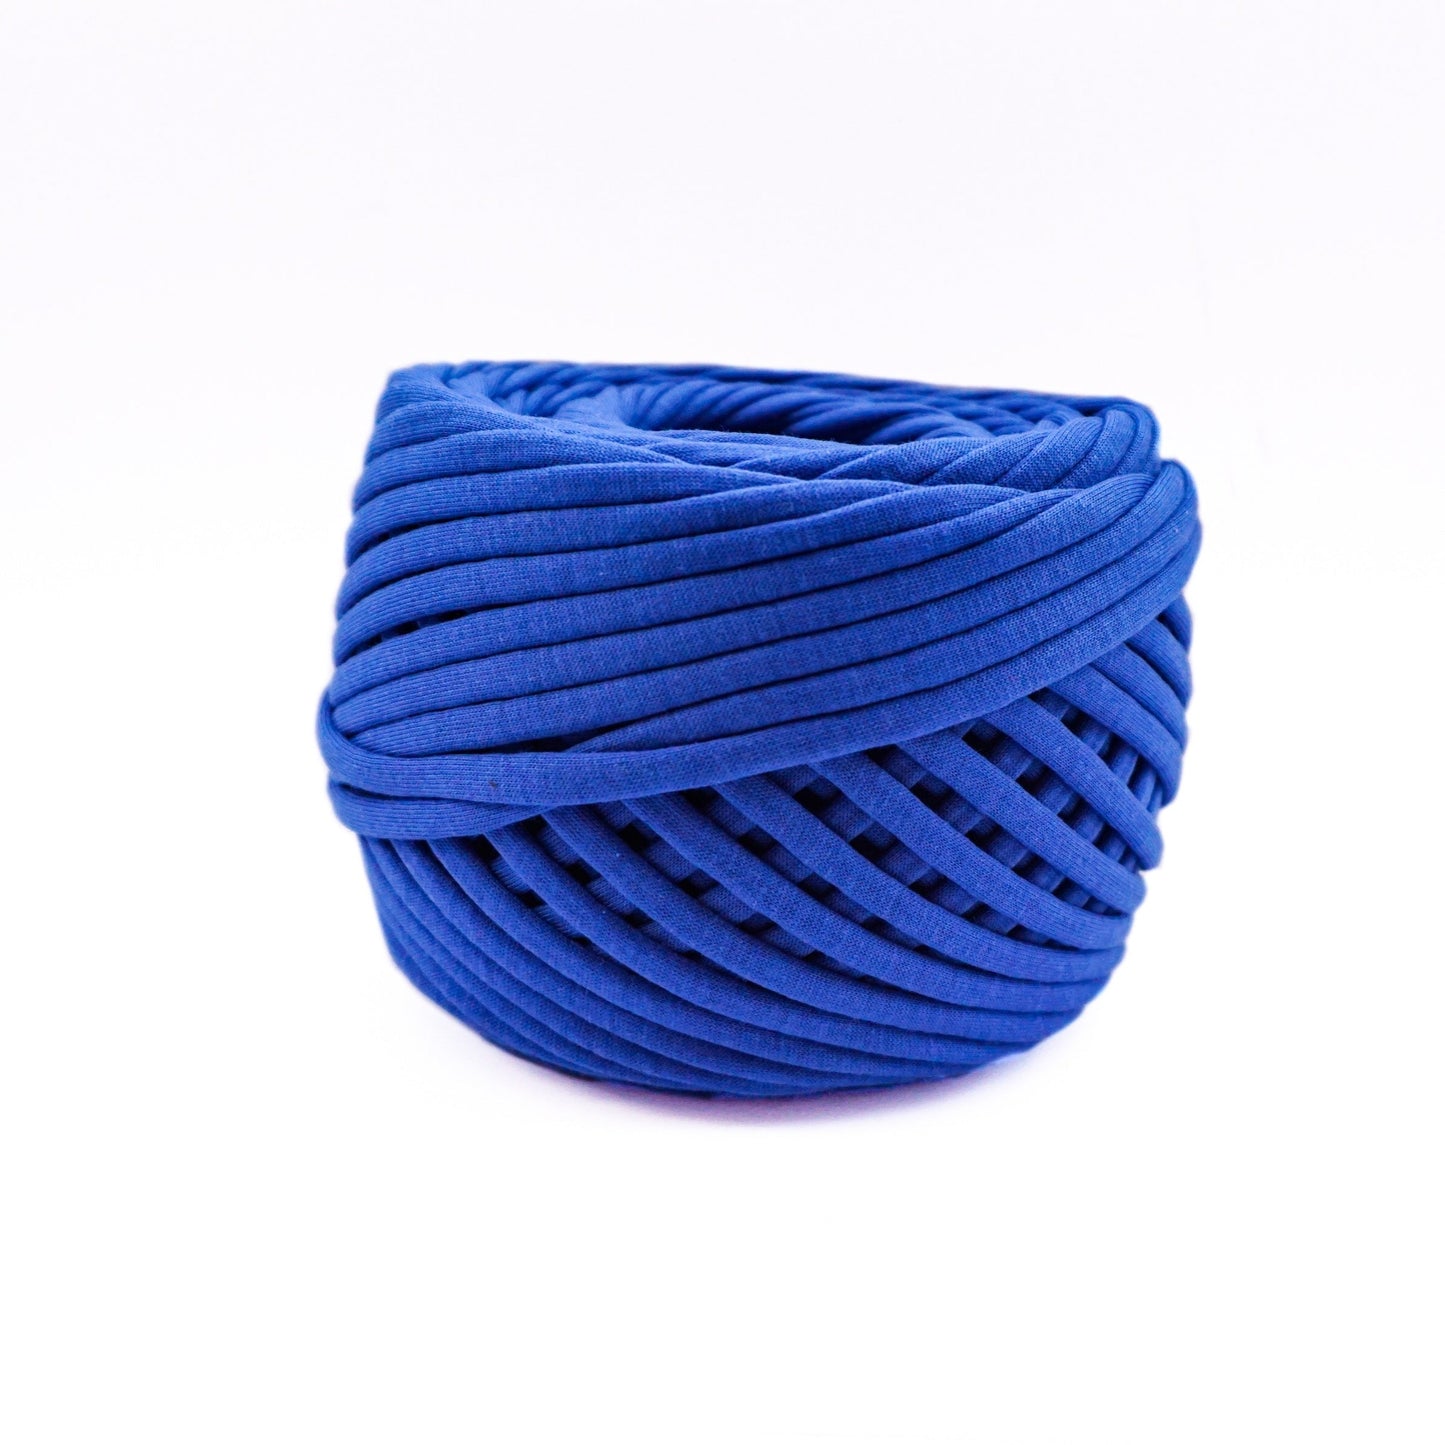 T-shirt yarn for crocheting baskets, bags, rugs and home decor.  Royal Blue